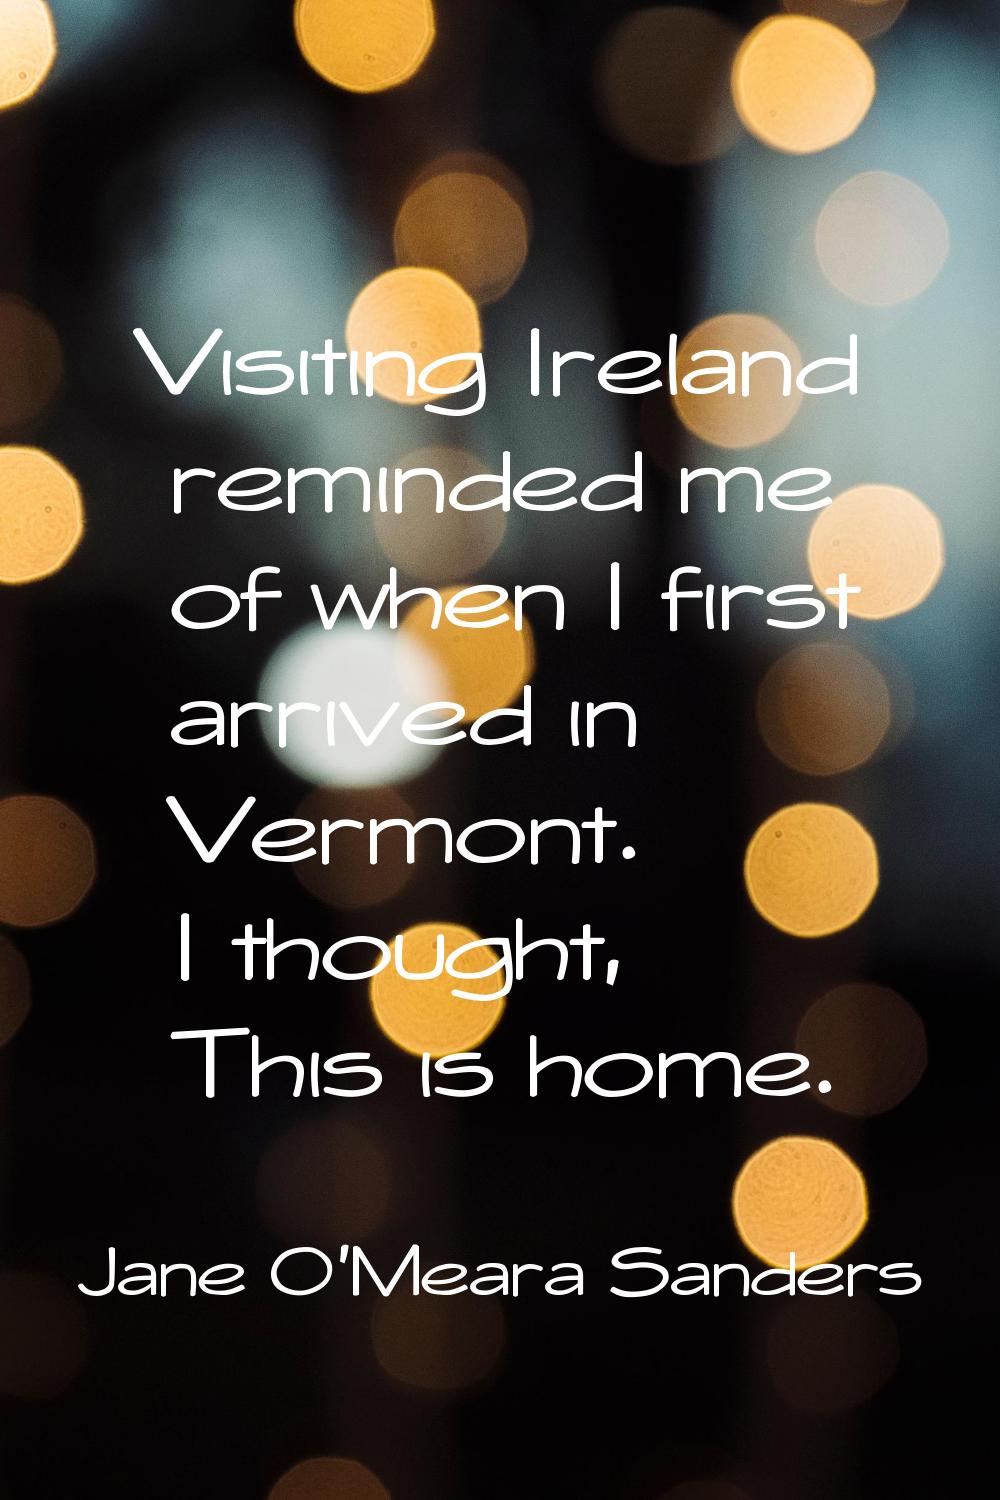 Visiting Ireland reminded me of when I first arrived in Vermont. I thought, This is home.